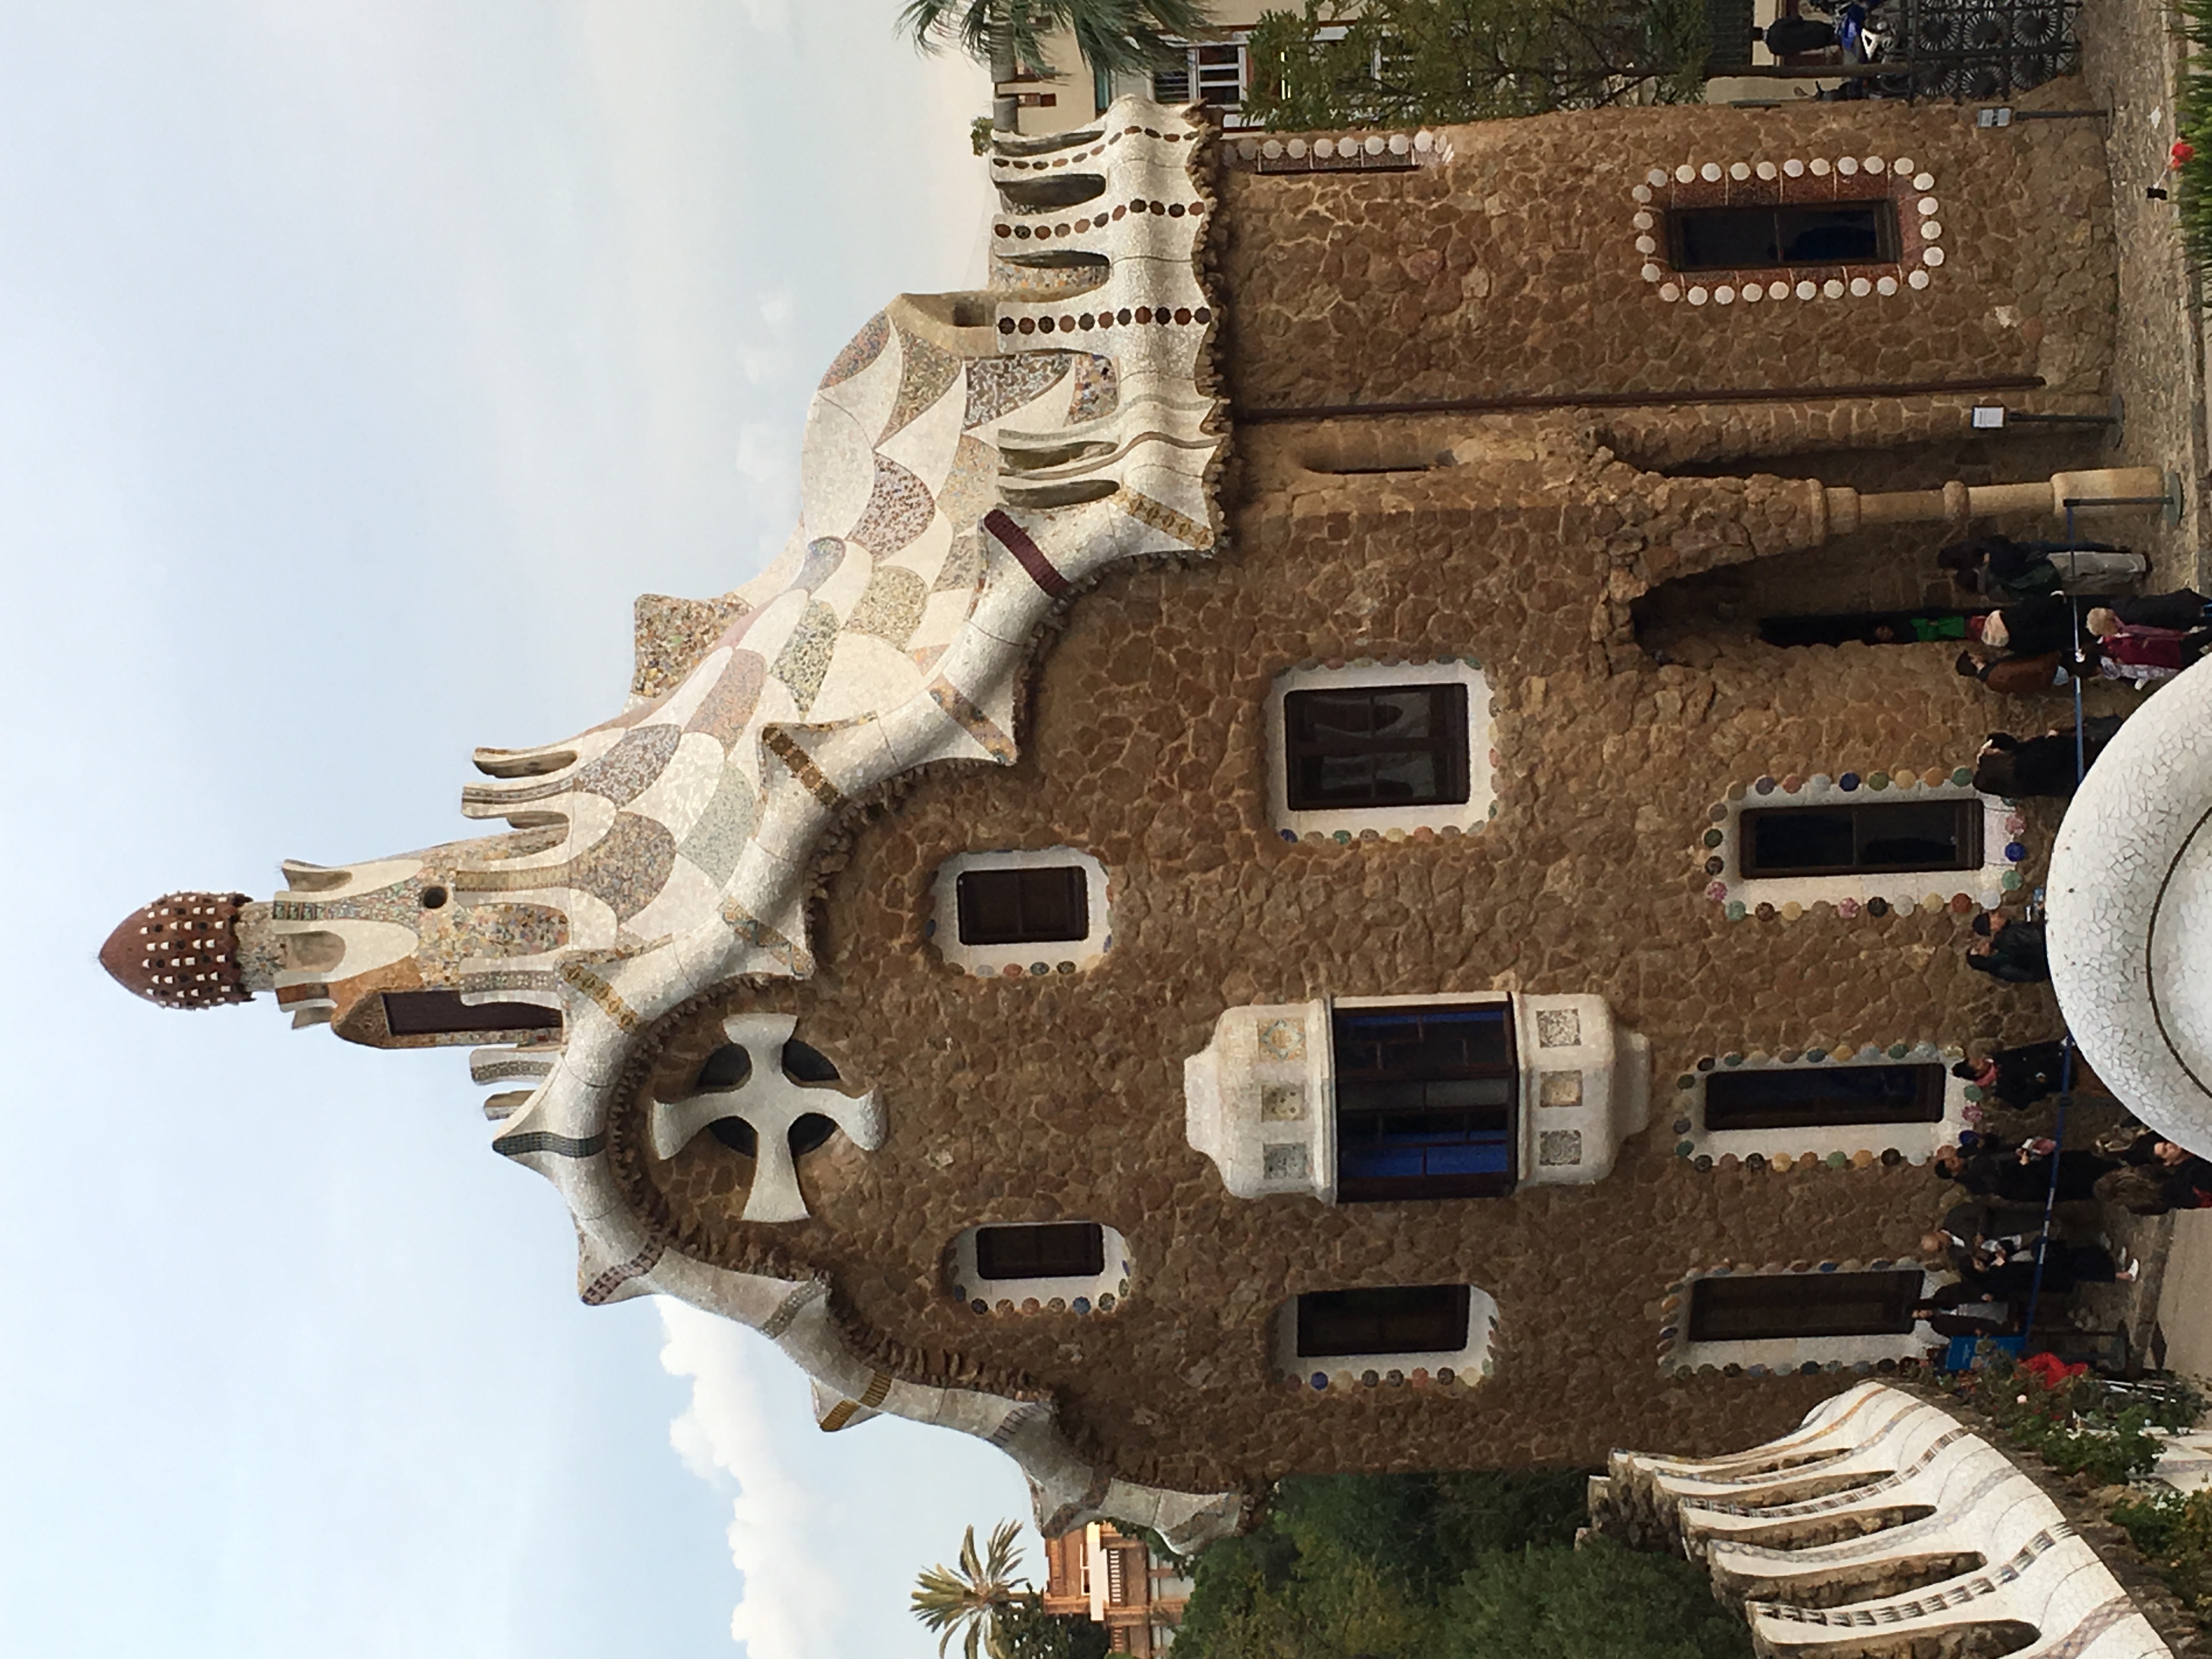 An image of the Gaudi-designed Porter's house in Parc Guell, Barcelona, Spain.